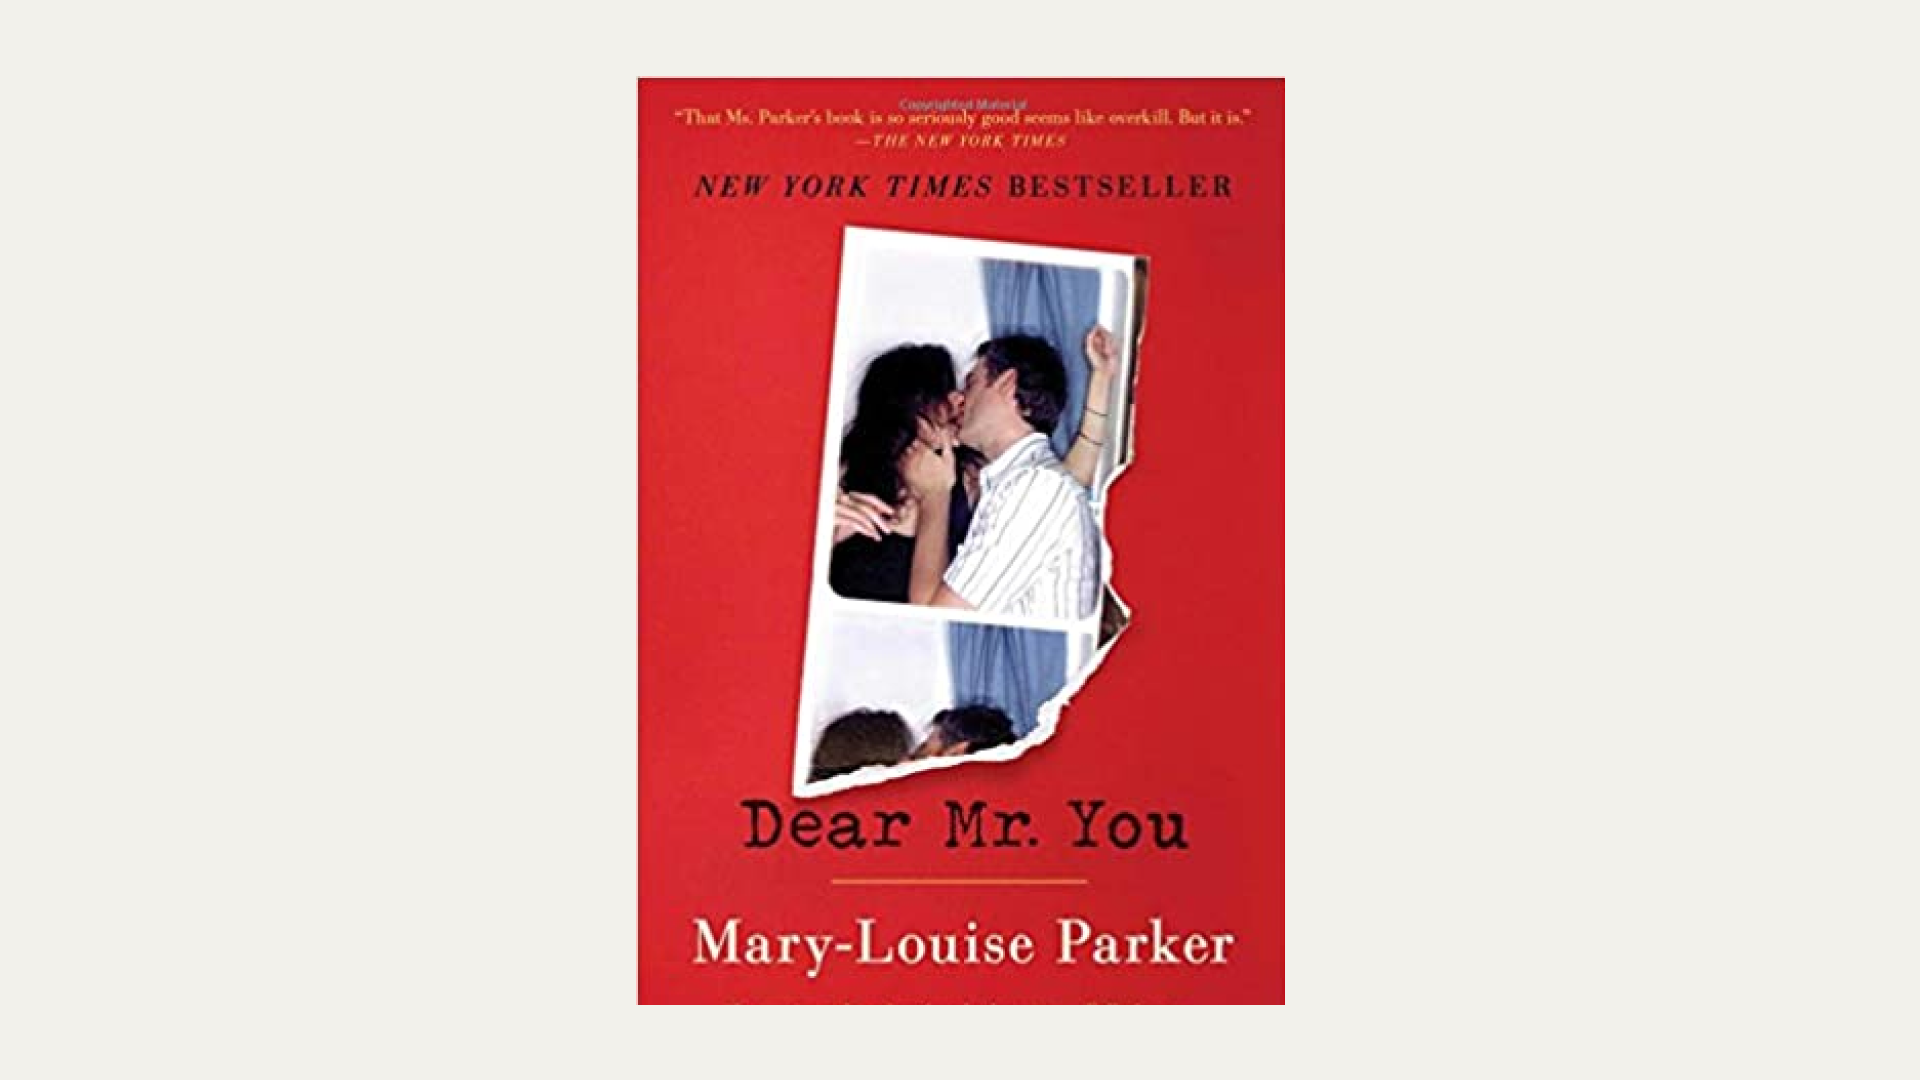 “Dear Mr. You” by Mary-Louise Parker